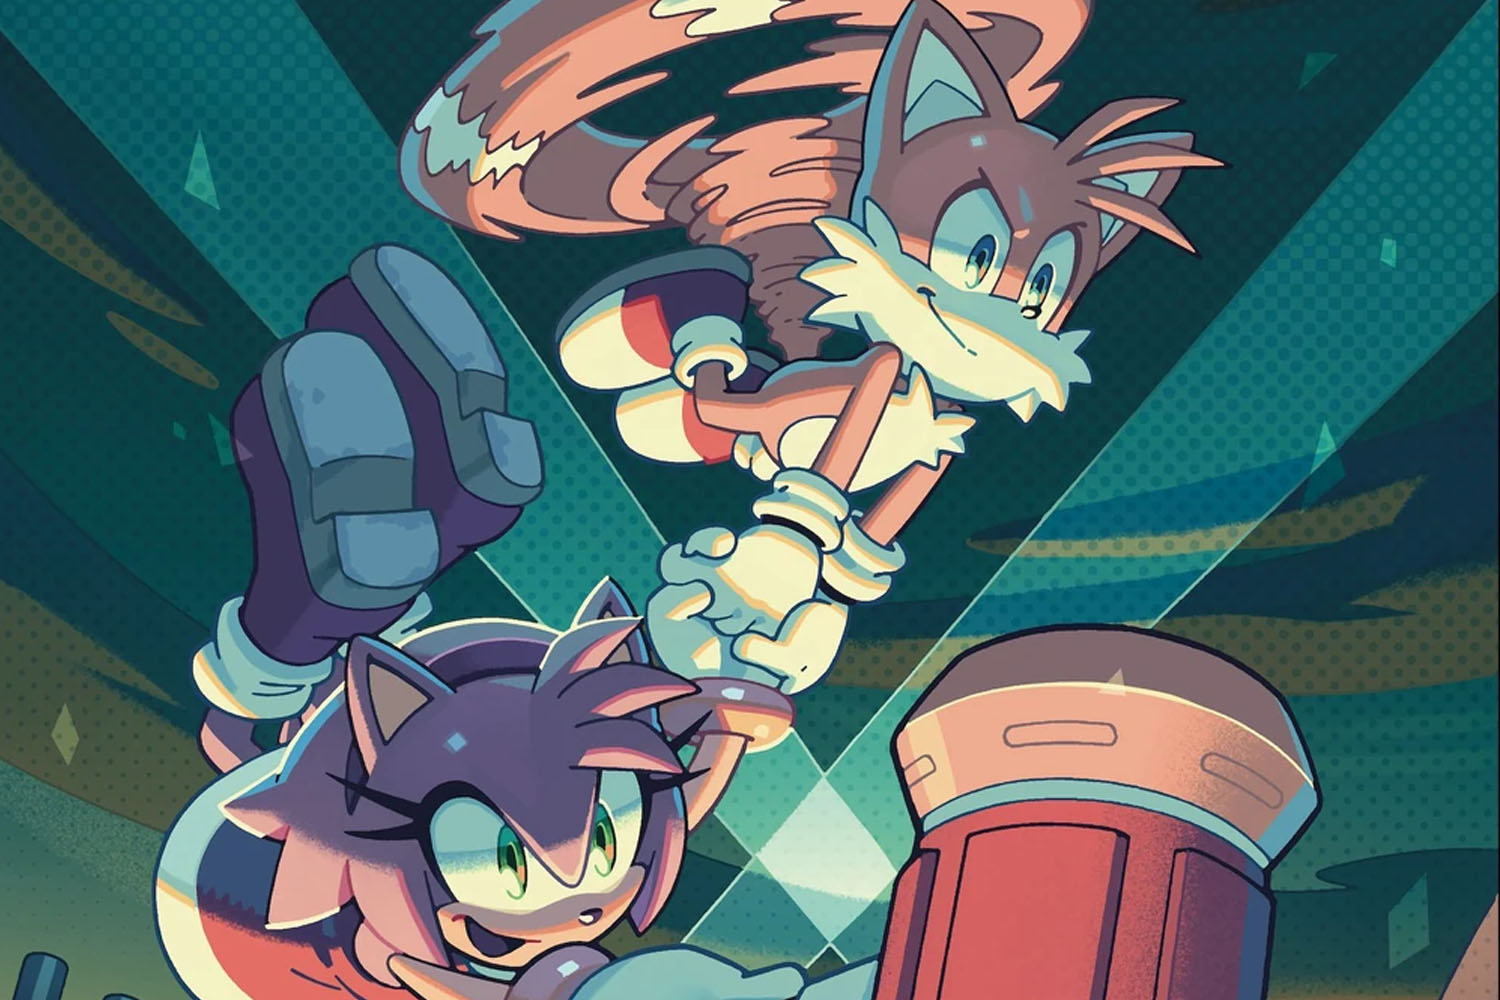 'Sonic the Hedgehog' #58 review